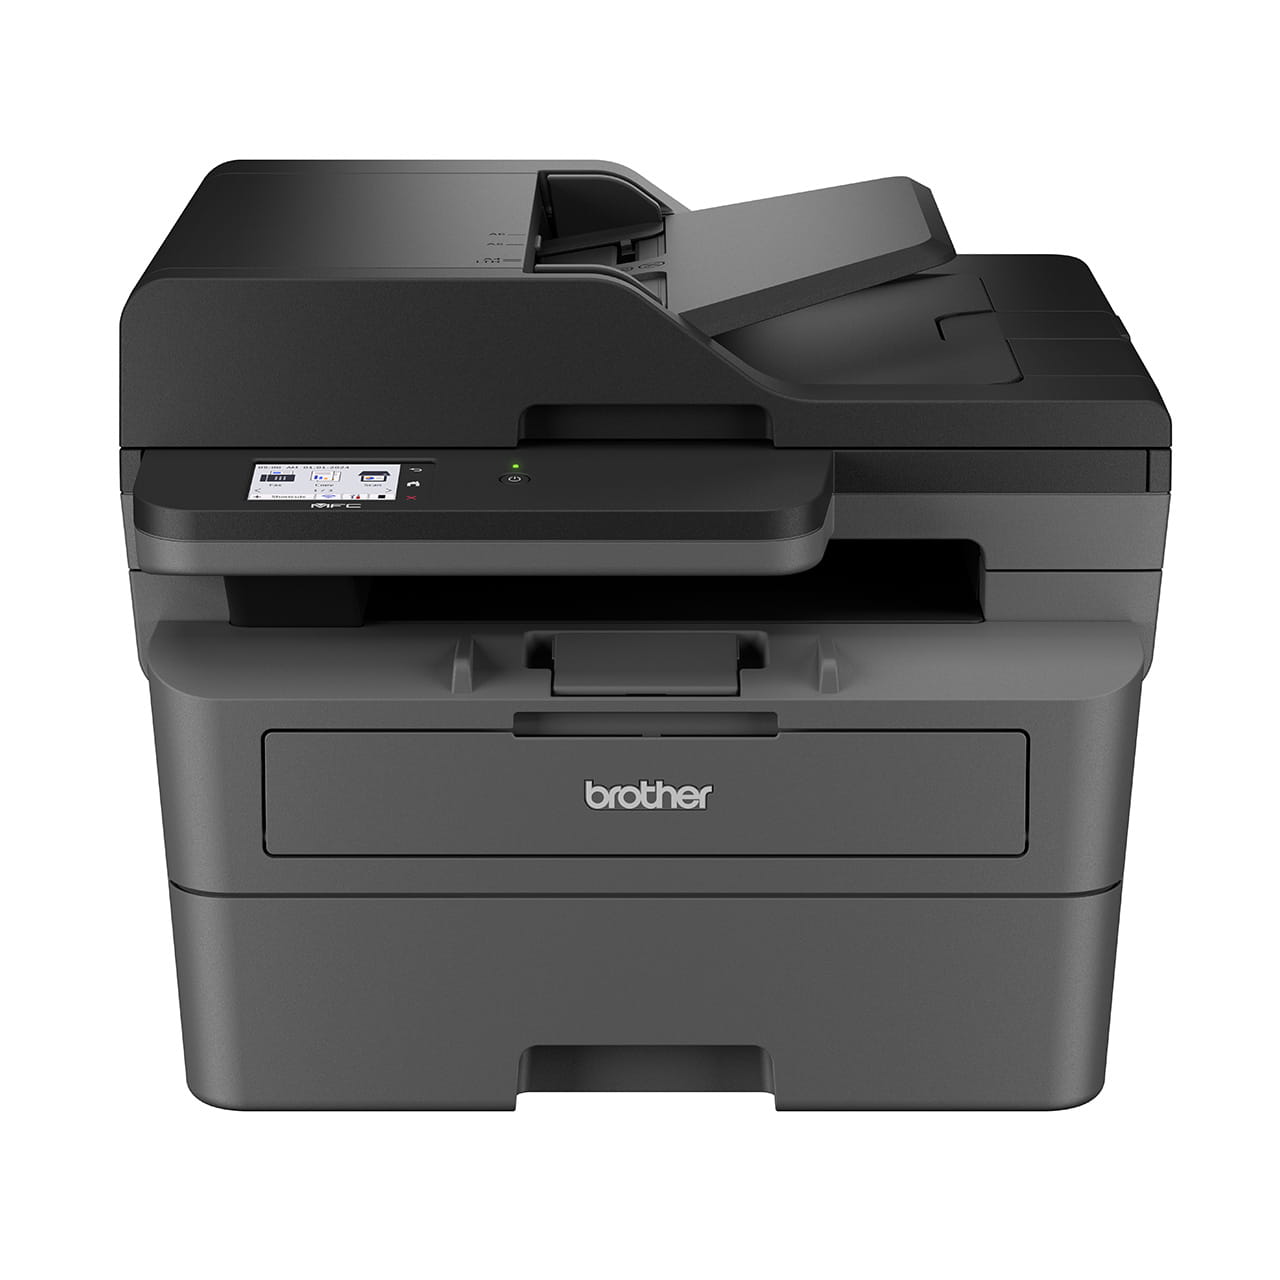 Brother MFC-L2820DW Mono Laser Printer Front View